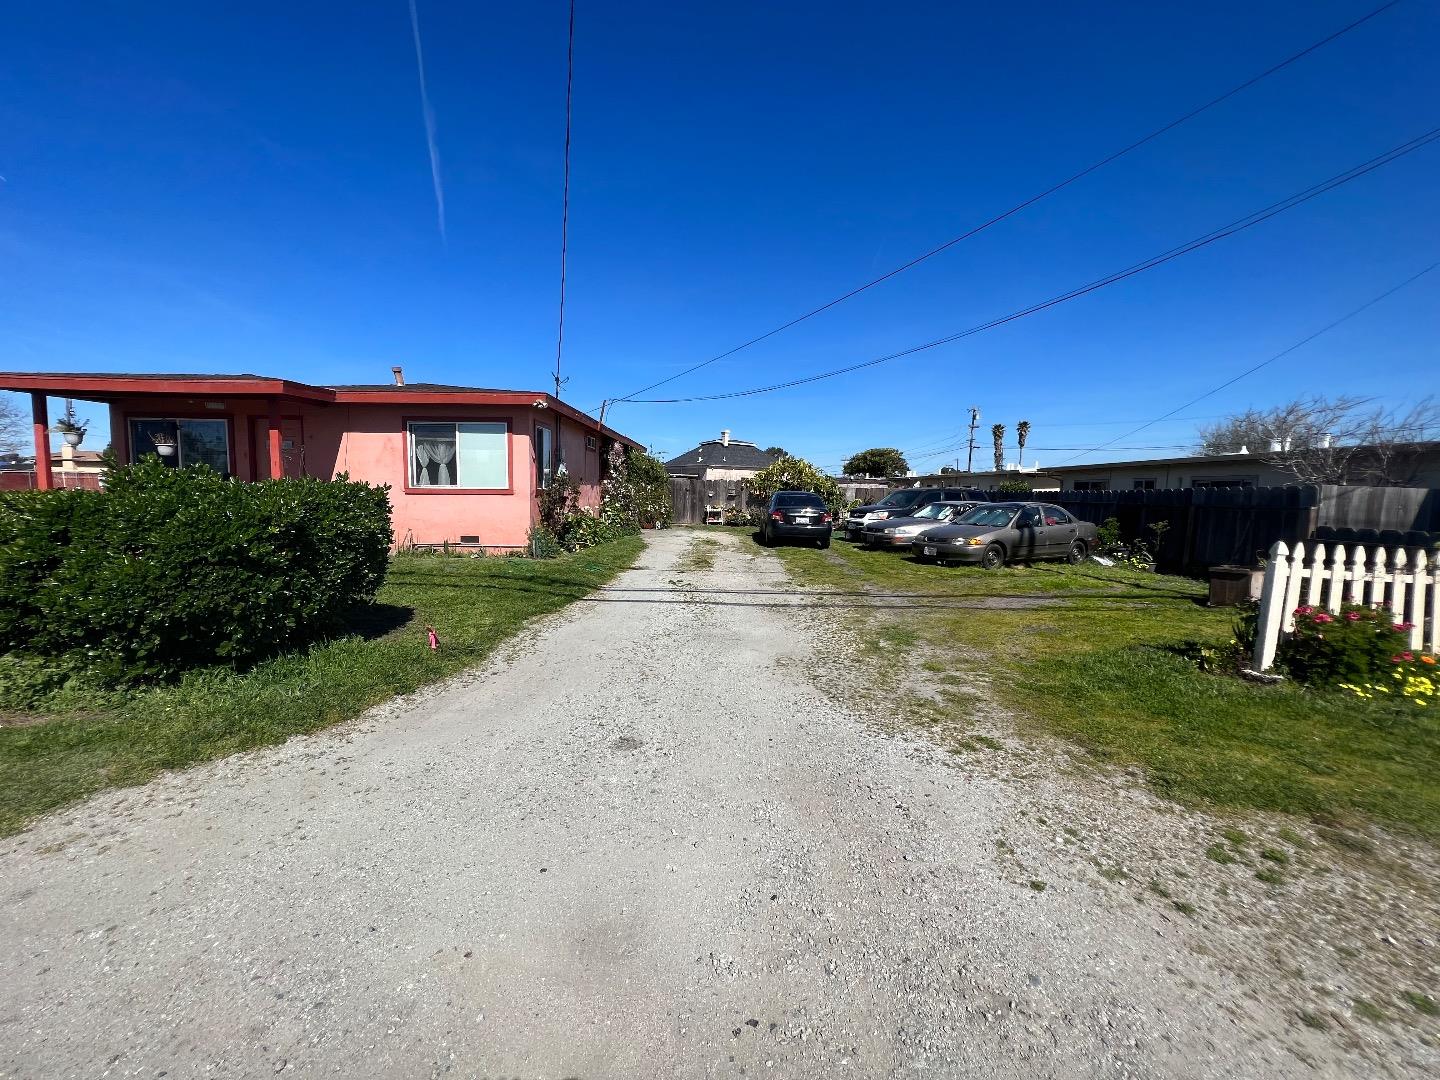 Photo of 11161 Wood St in Castroville, CA